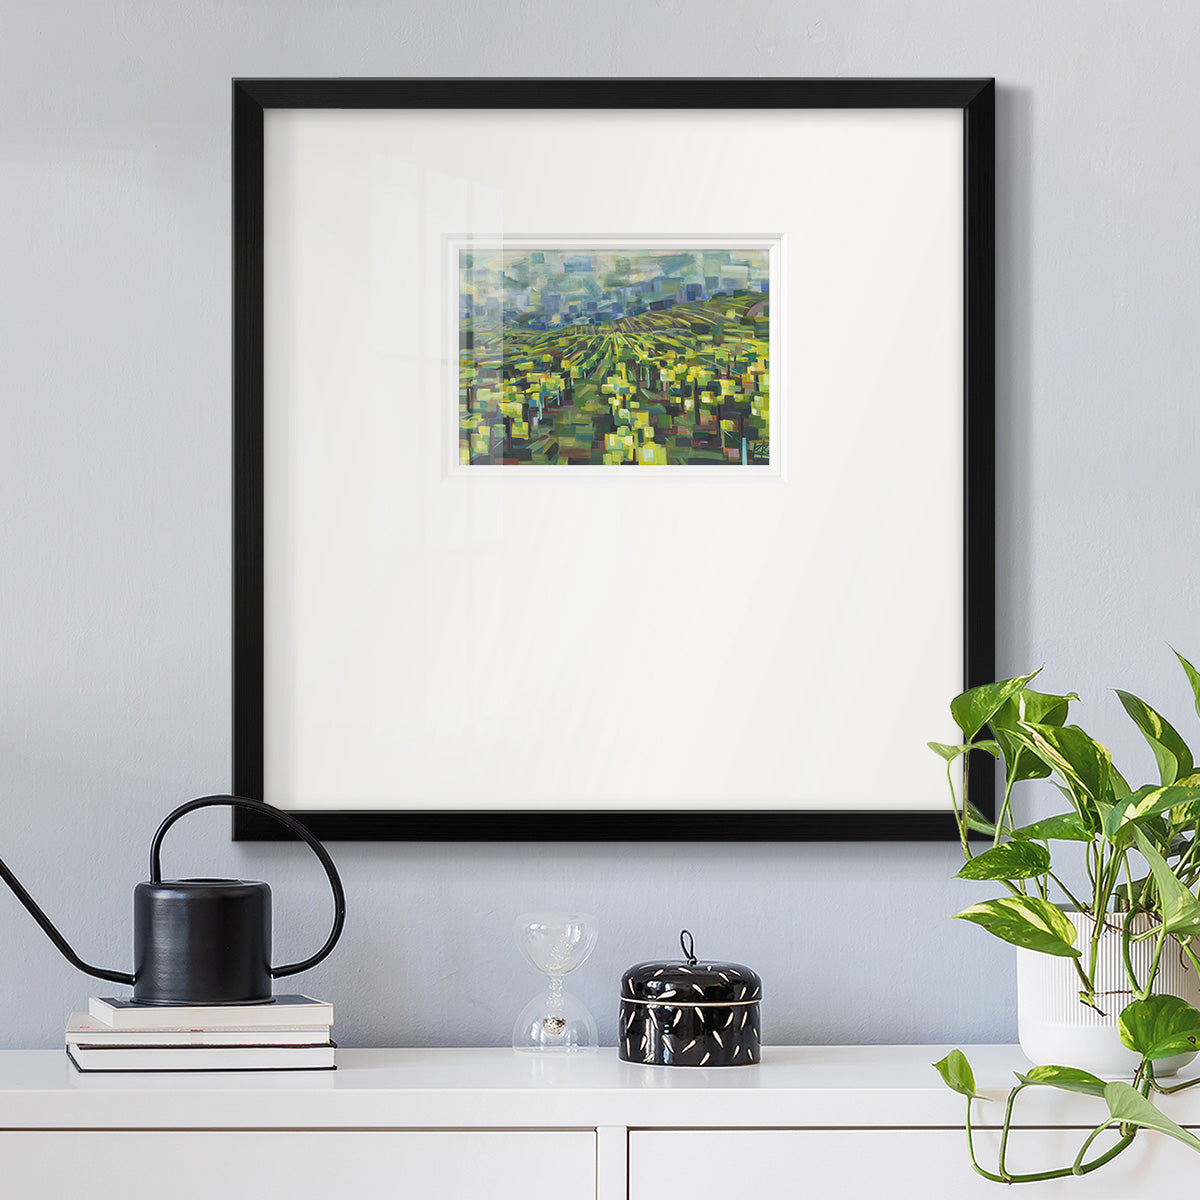 Yellow Grapevines Forever Premium Framed Print Double Matboard